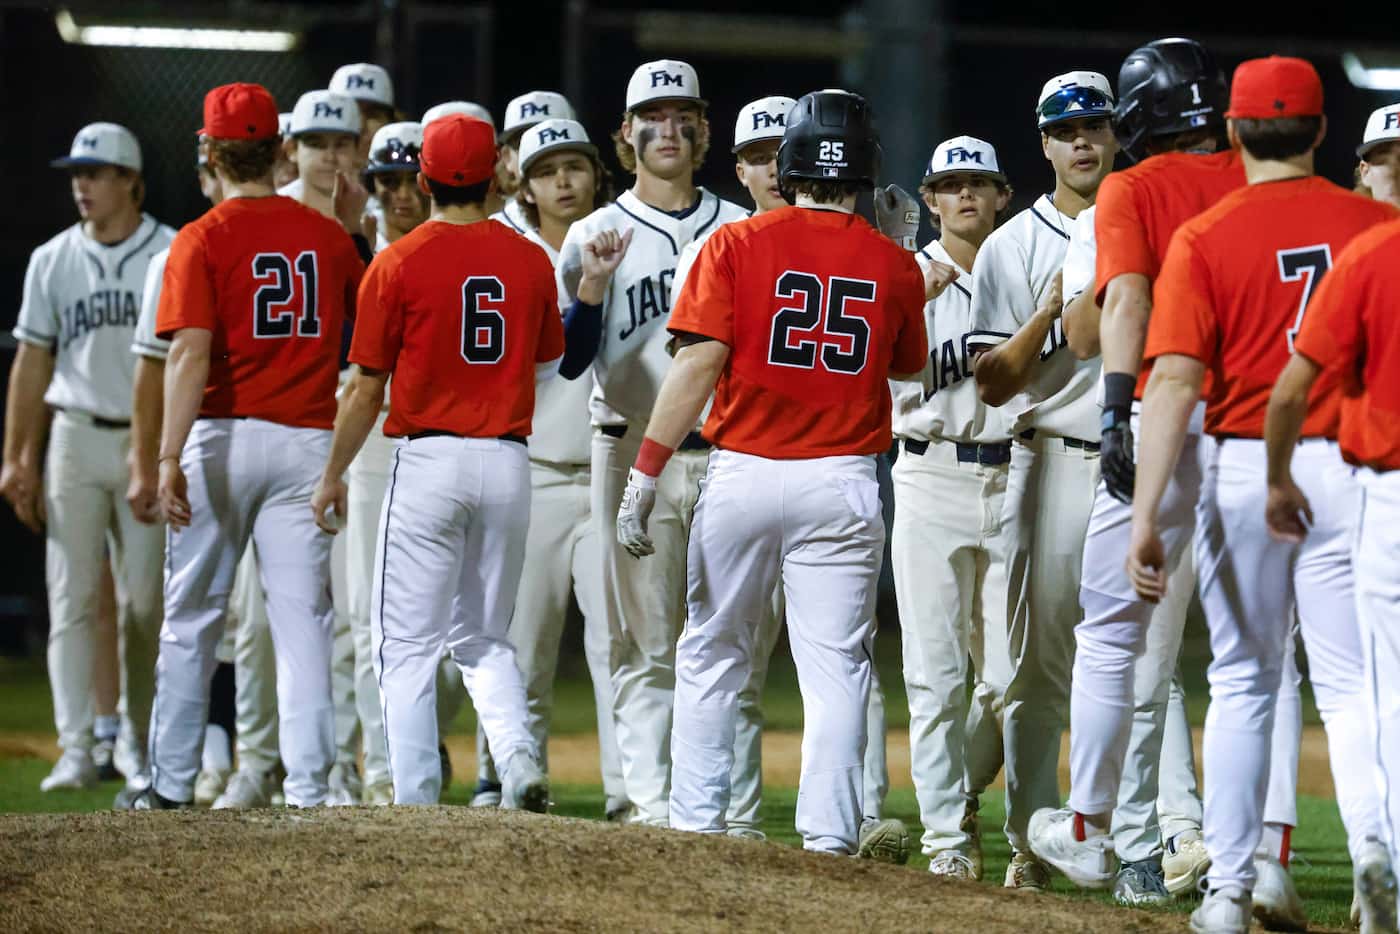 Flower Mound and Coppell high players shake hands after a baseball game at Flower Mound High...